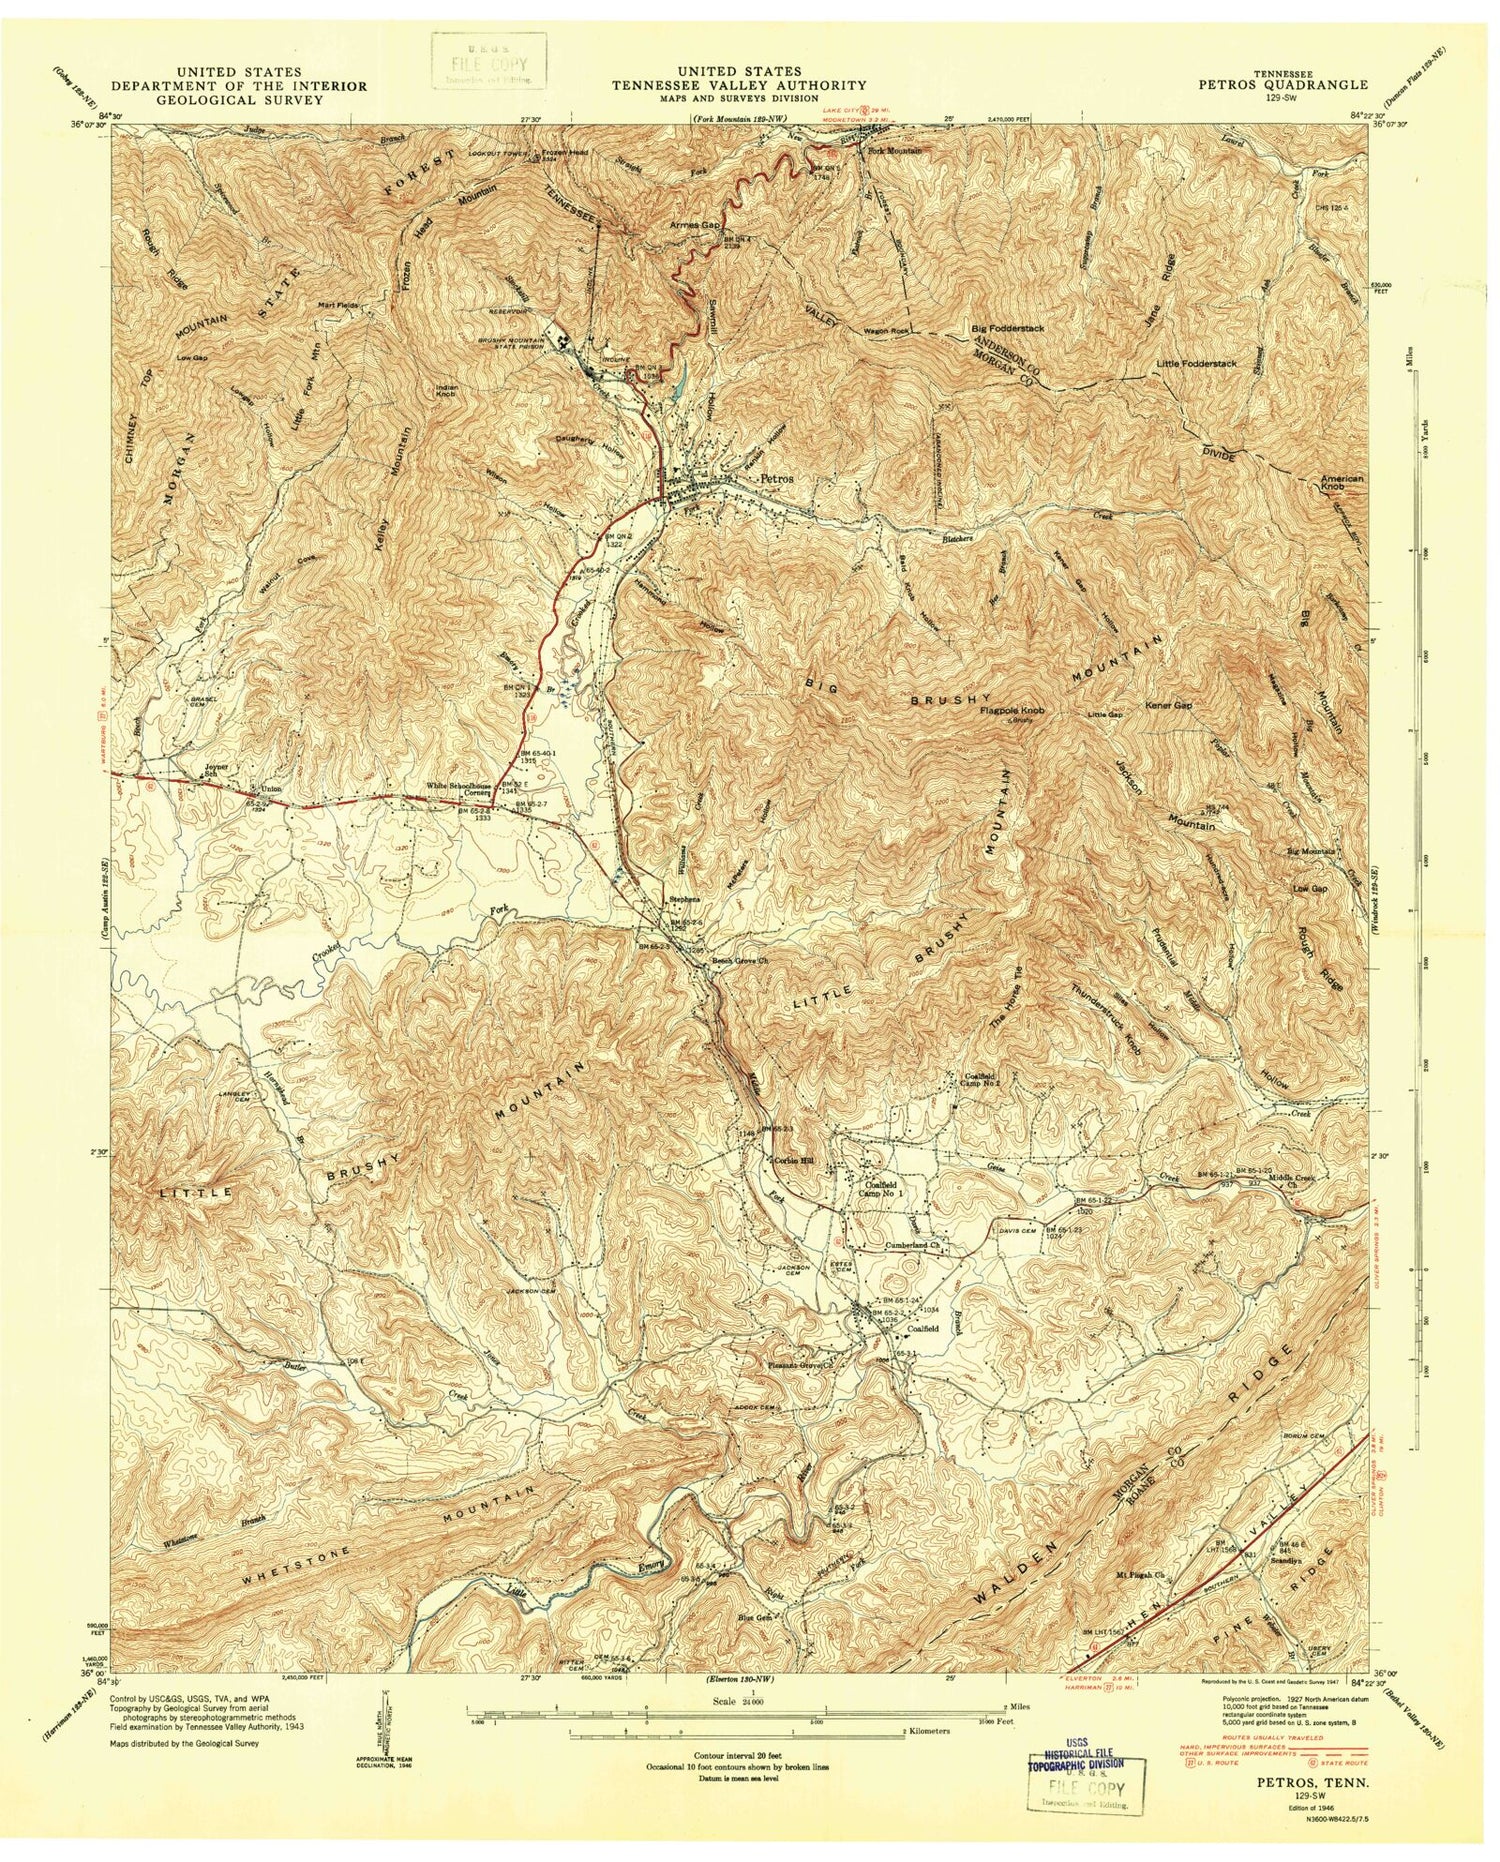 USGS Classic Petros Tennessee 7.5'x7.5' Topo Map Image